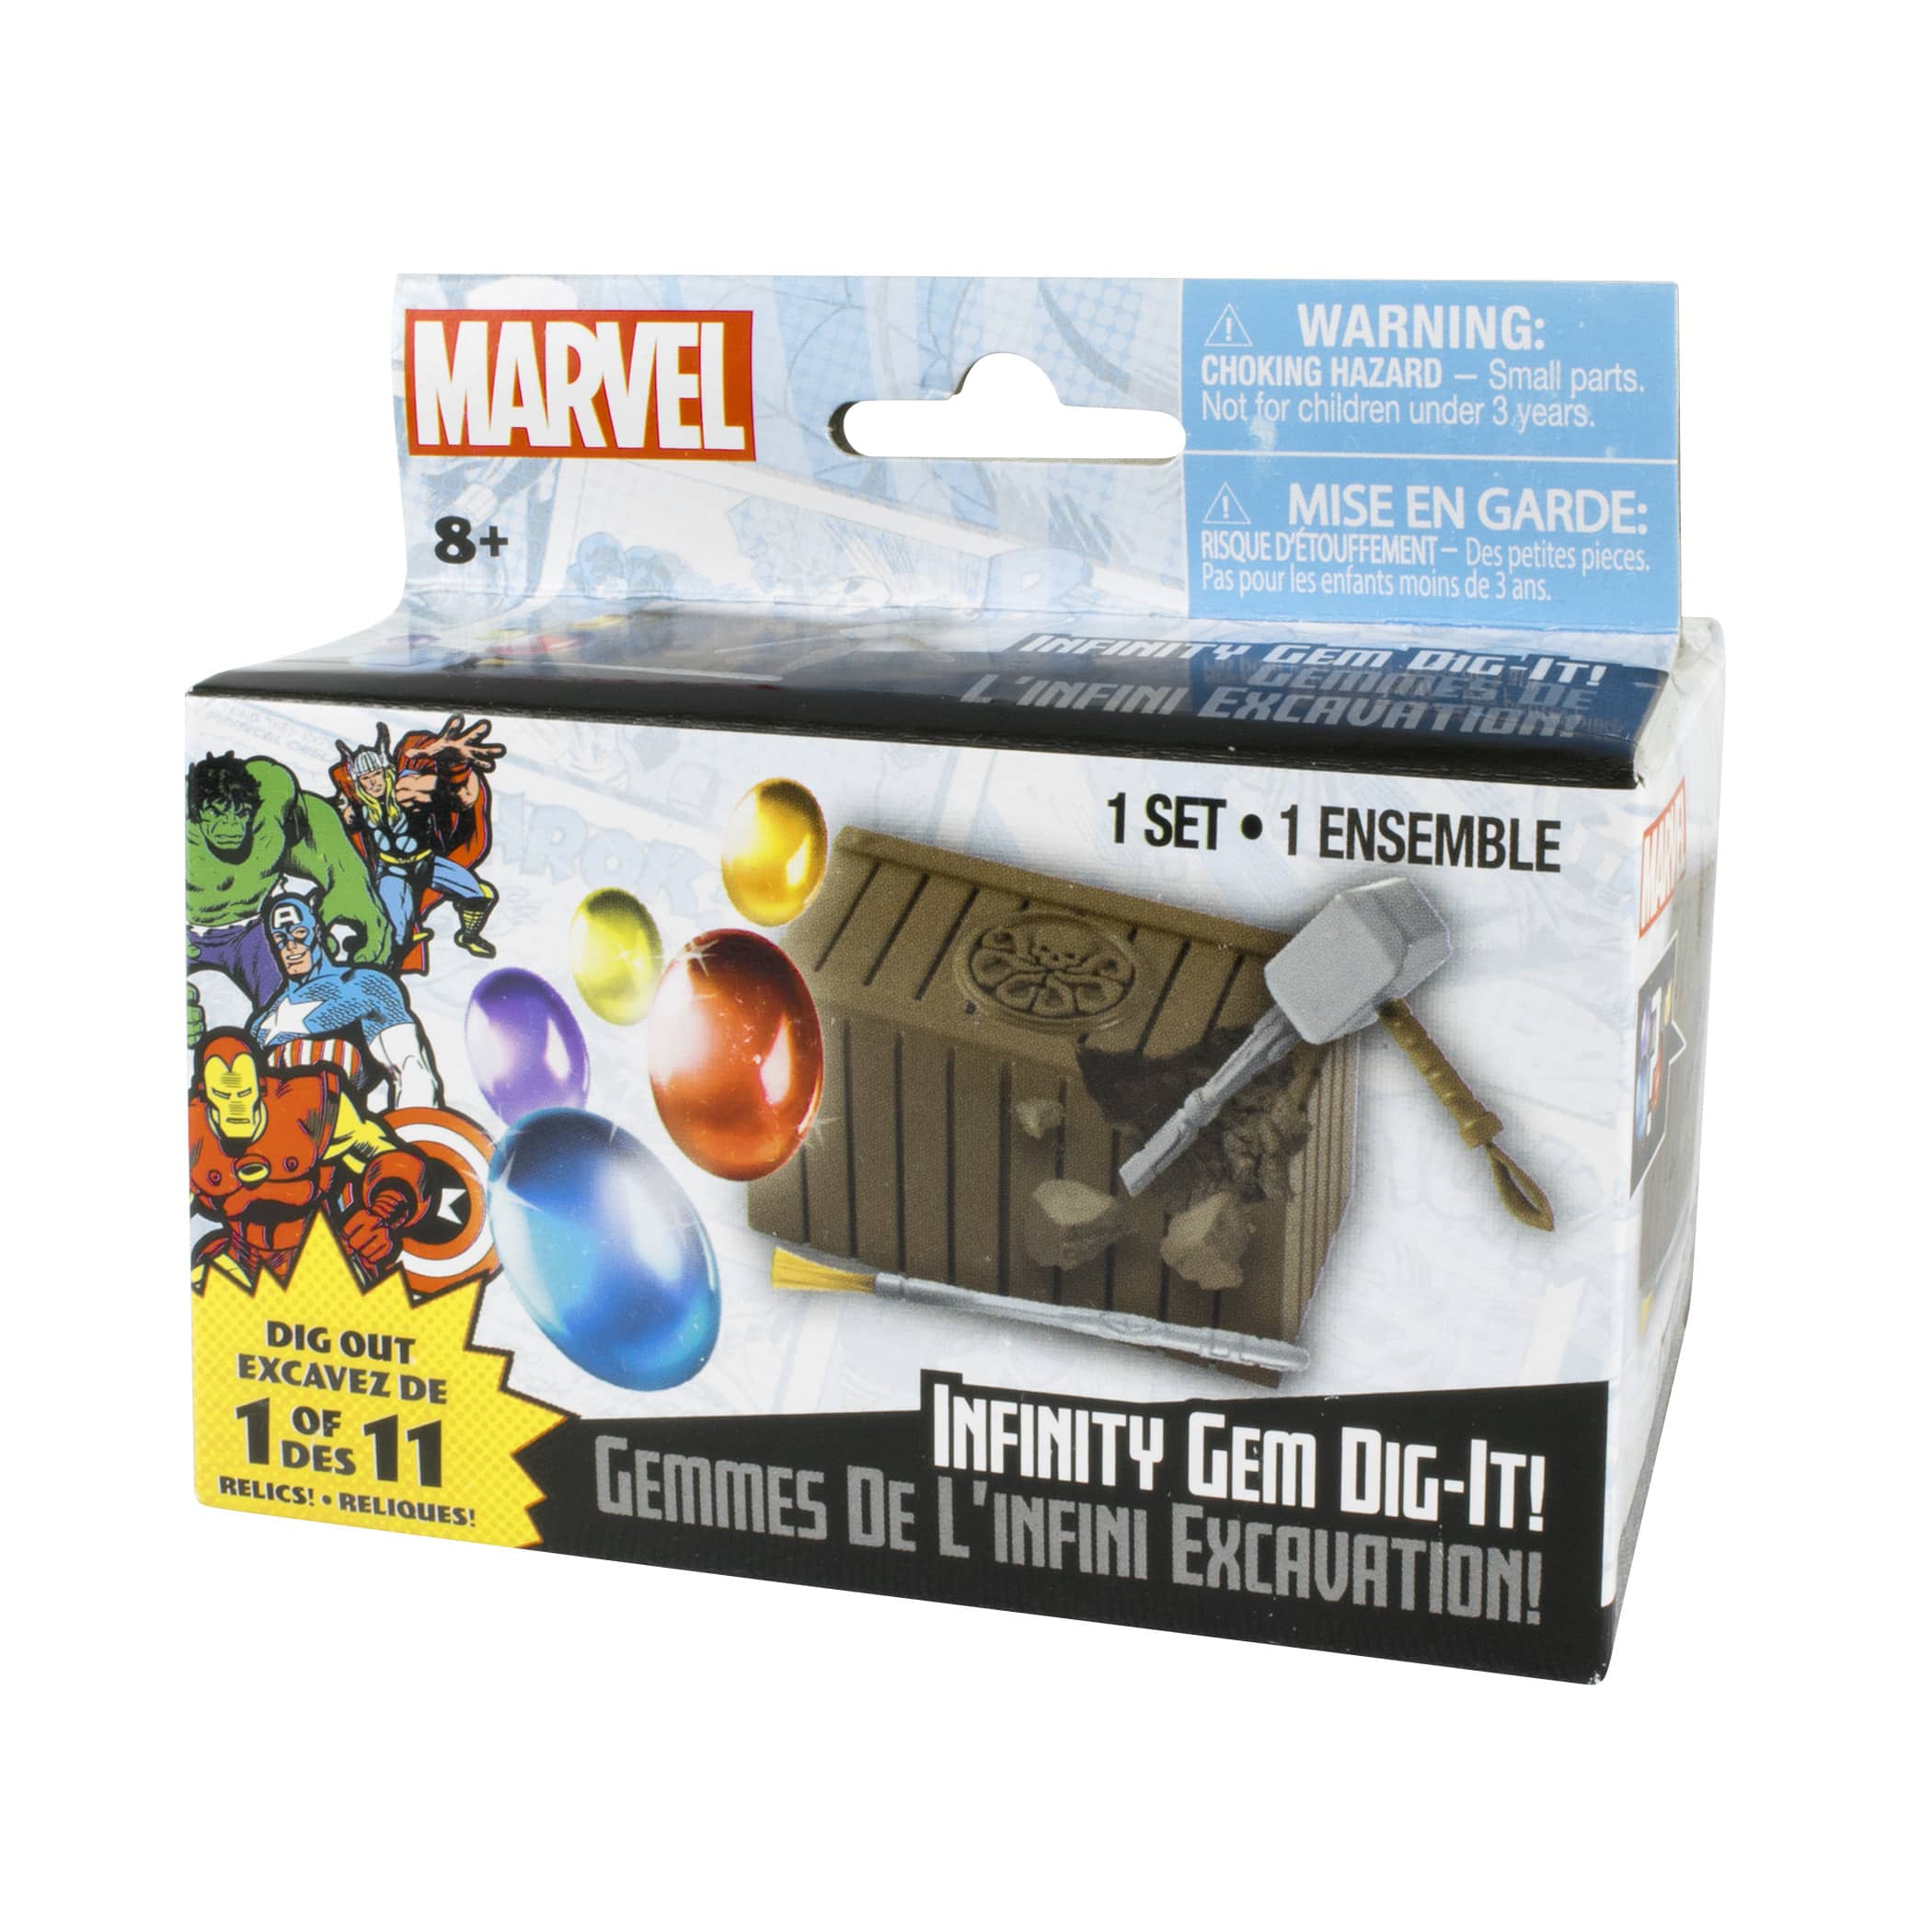 [WATCH] The best geeky gift on Valentine's Day? An Infinity Gem Dig-It! of course